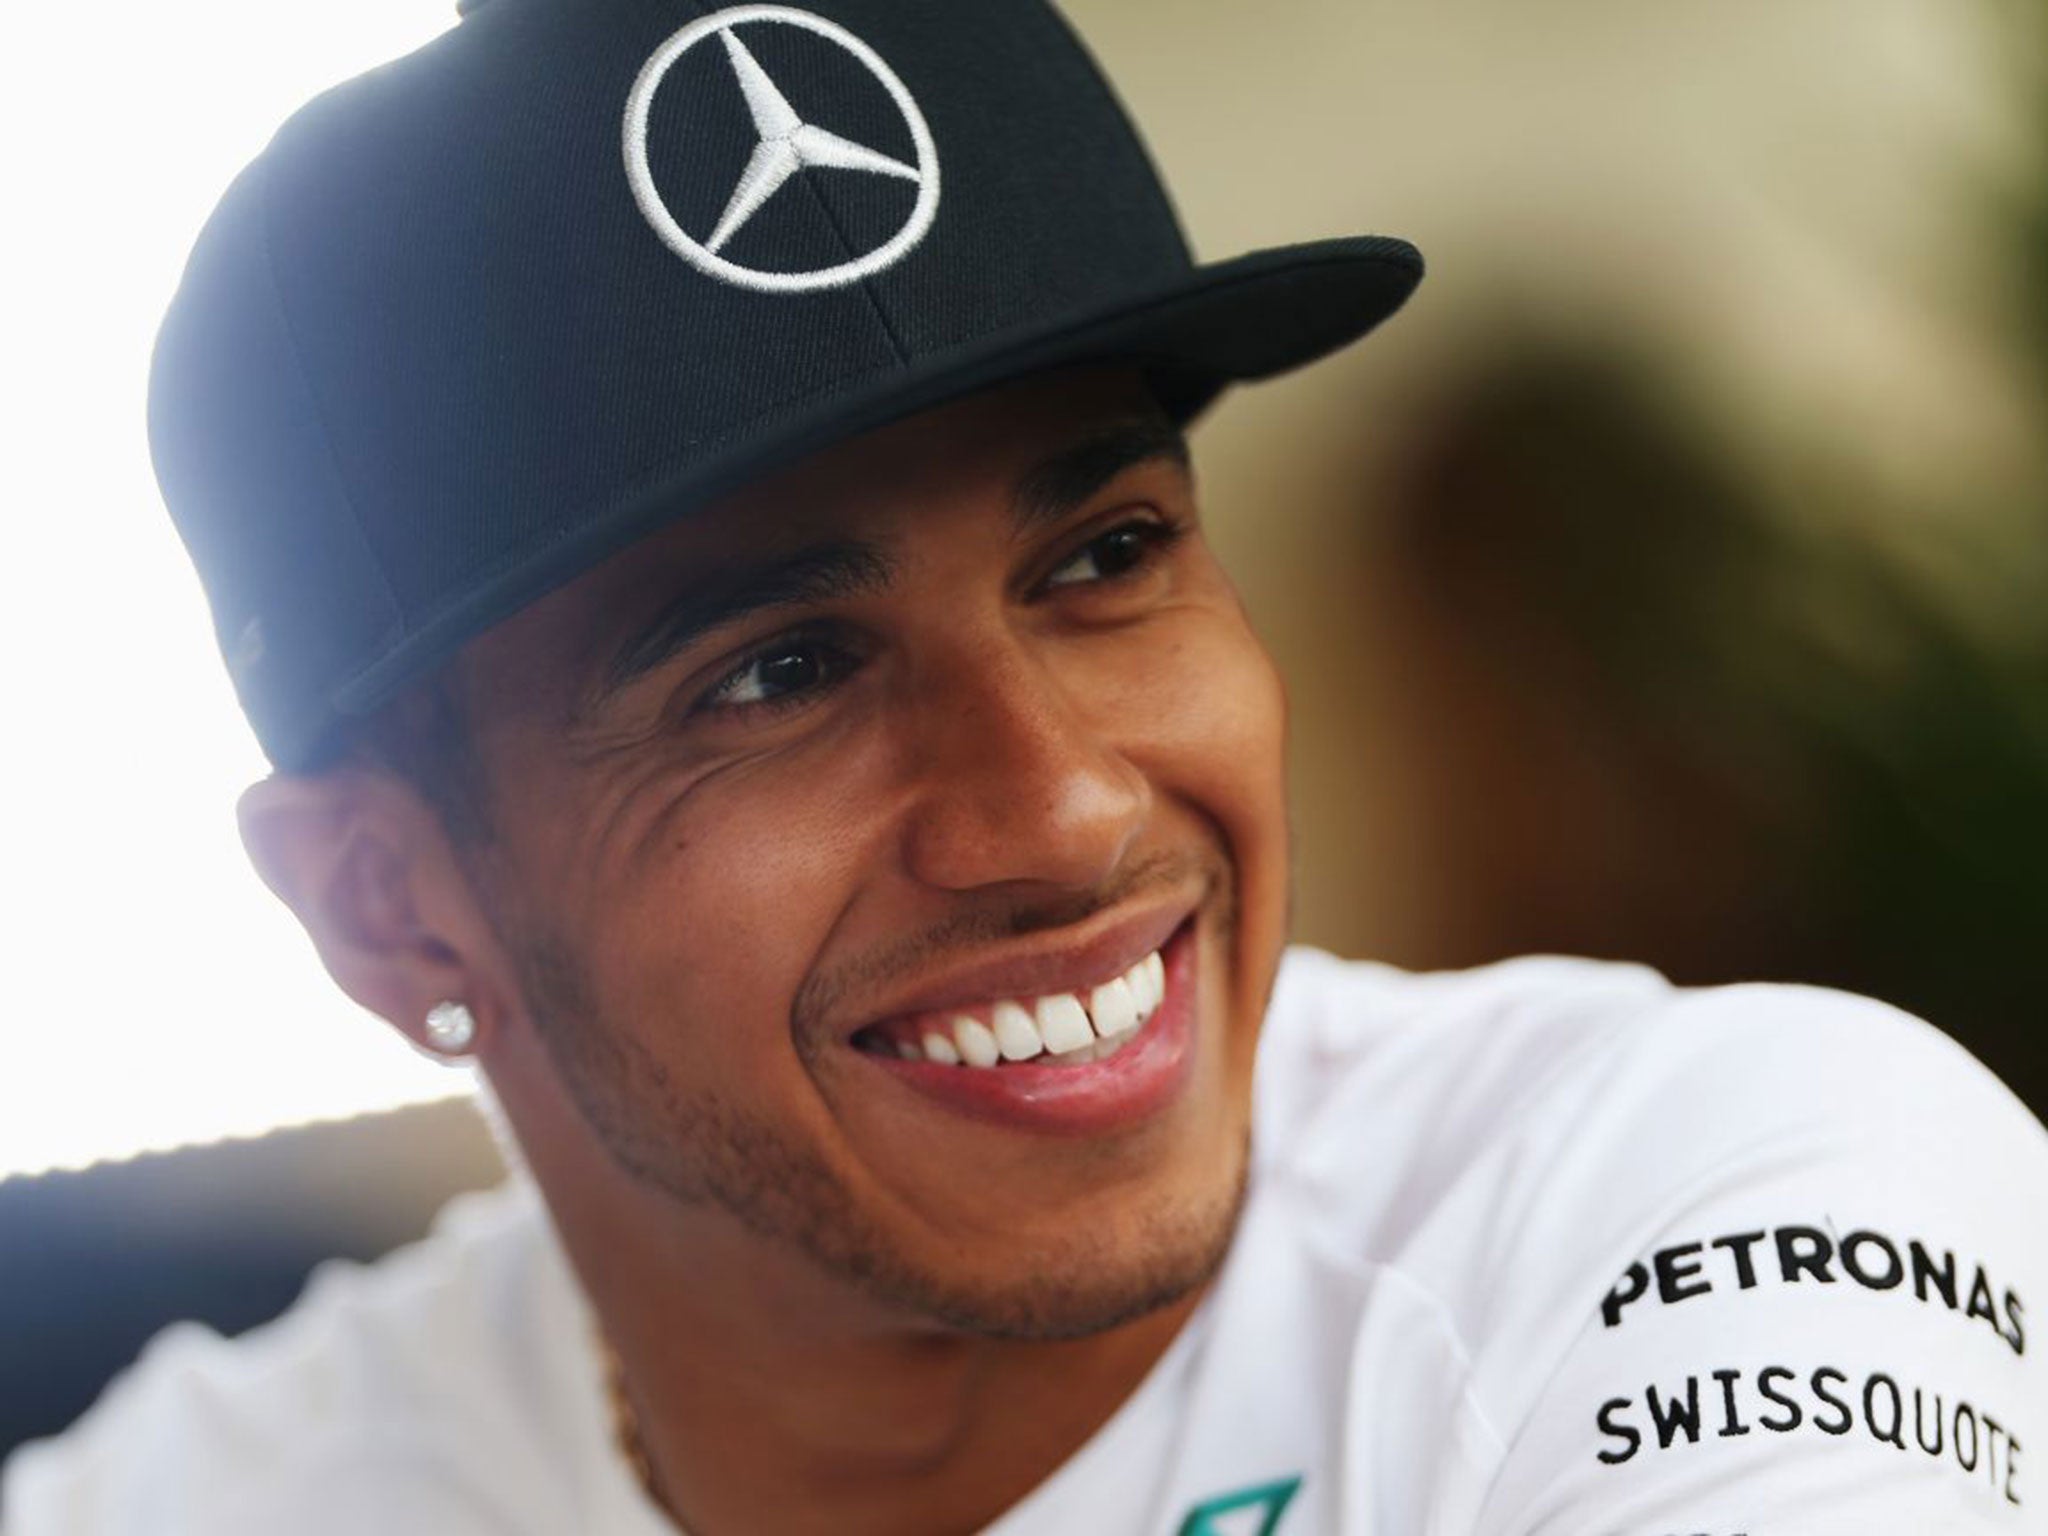 Lewis Hamilton is all smiles ahead of this year's British Grand Prix